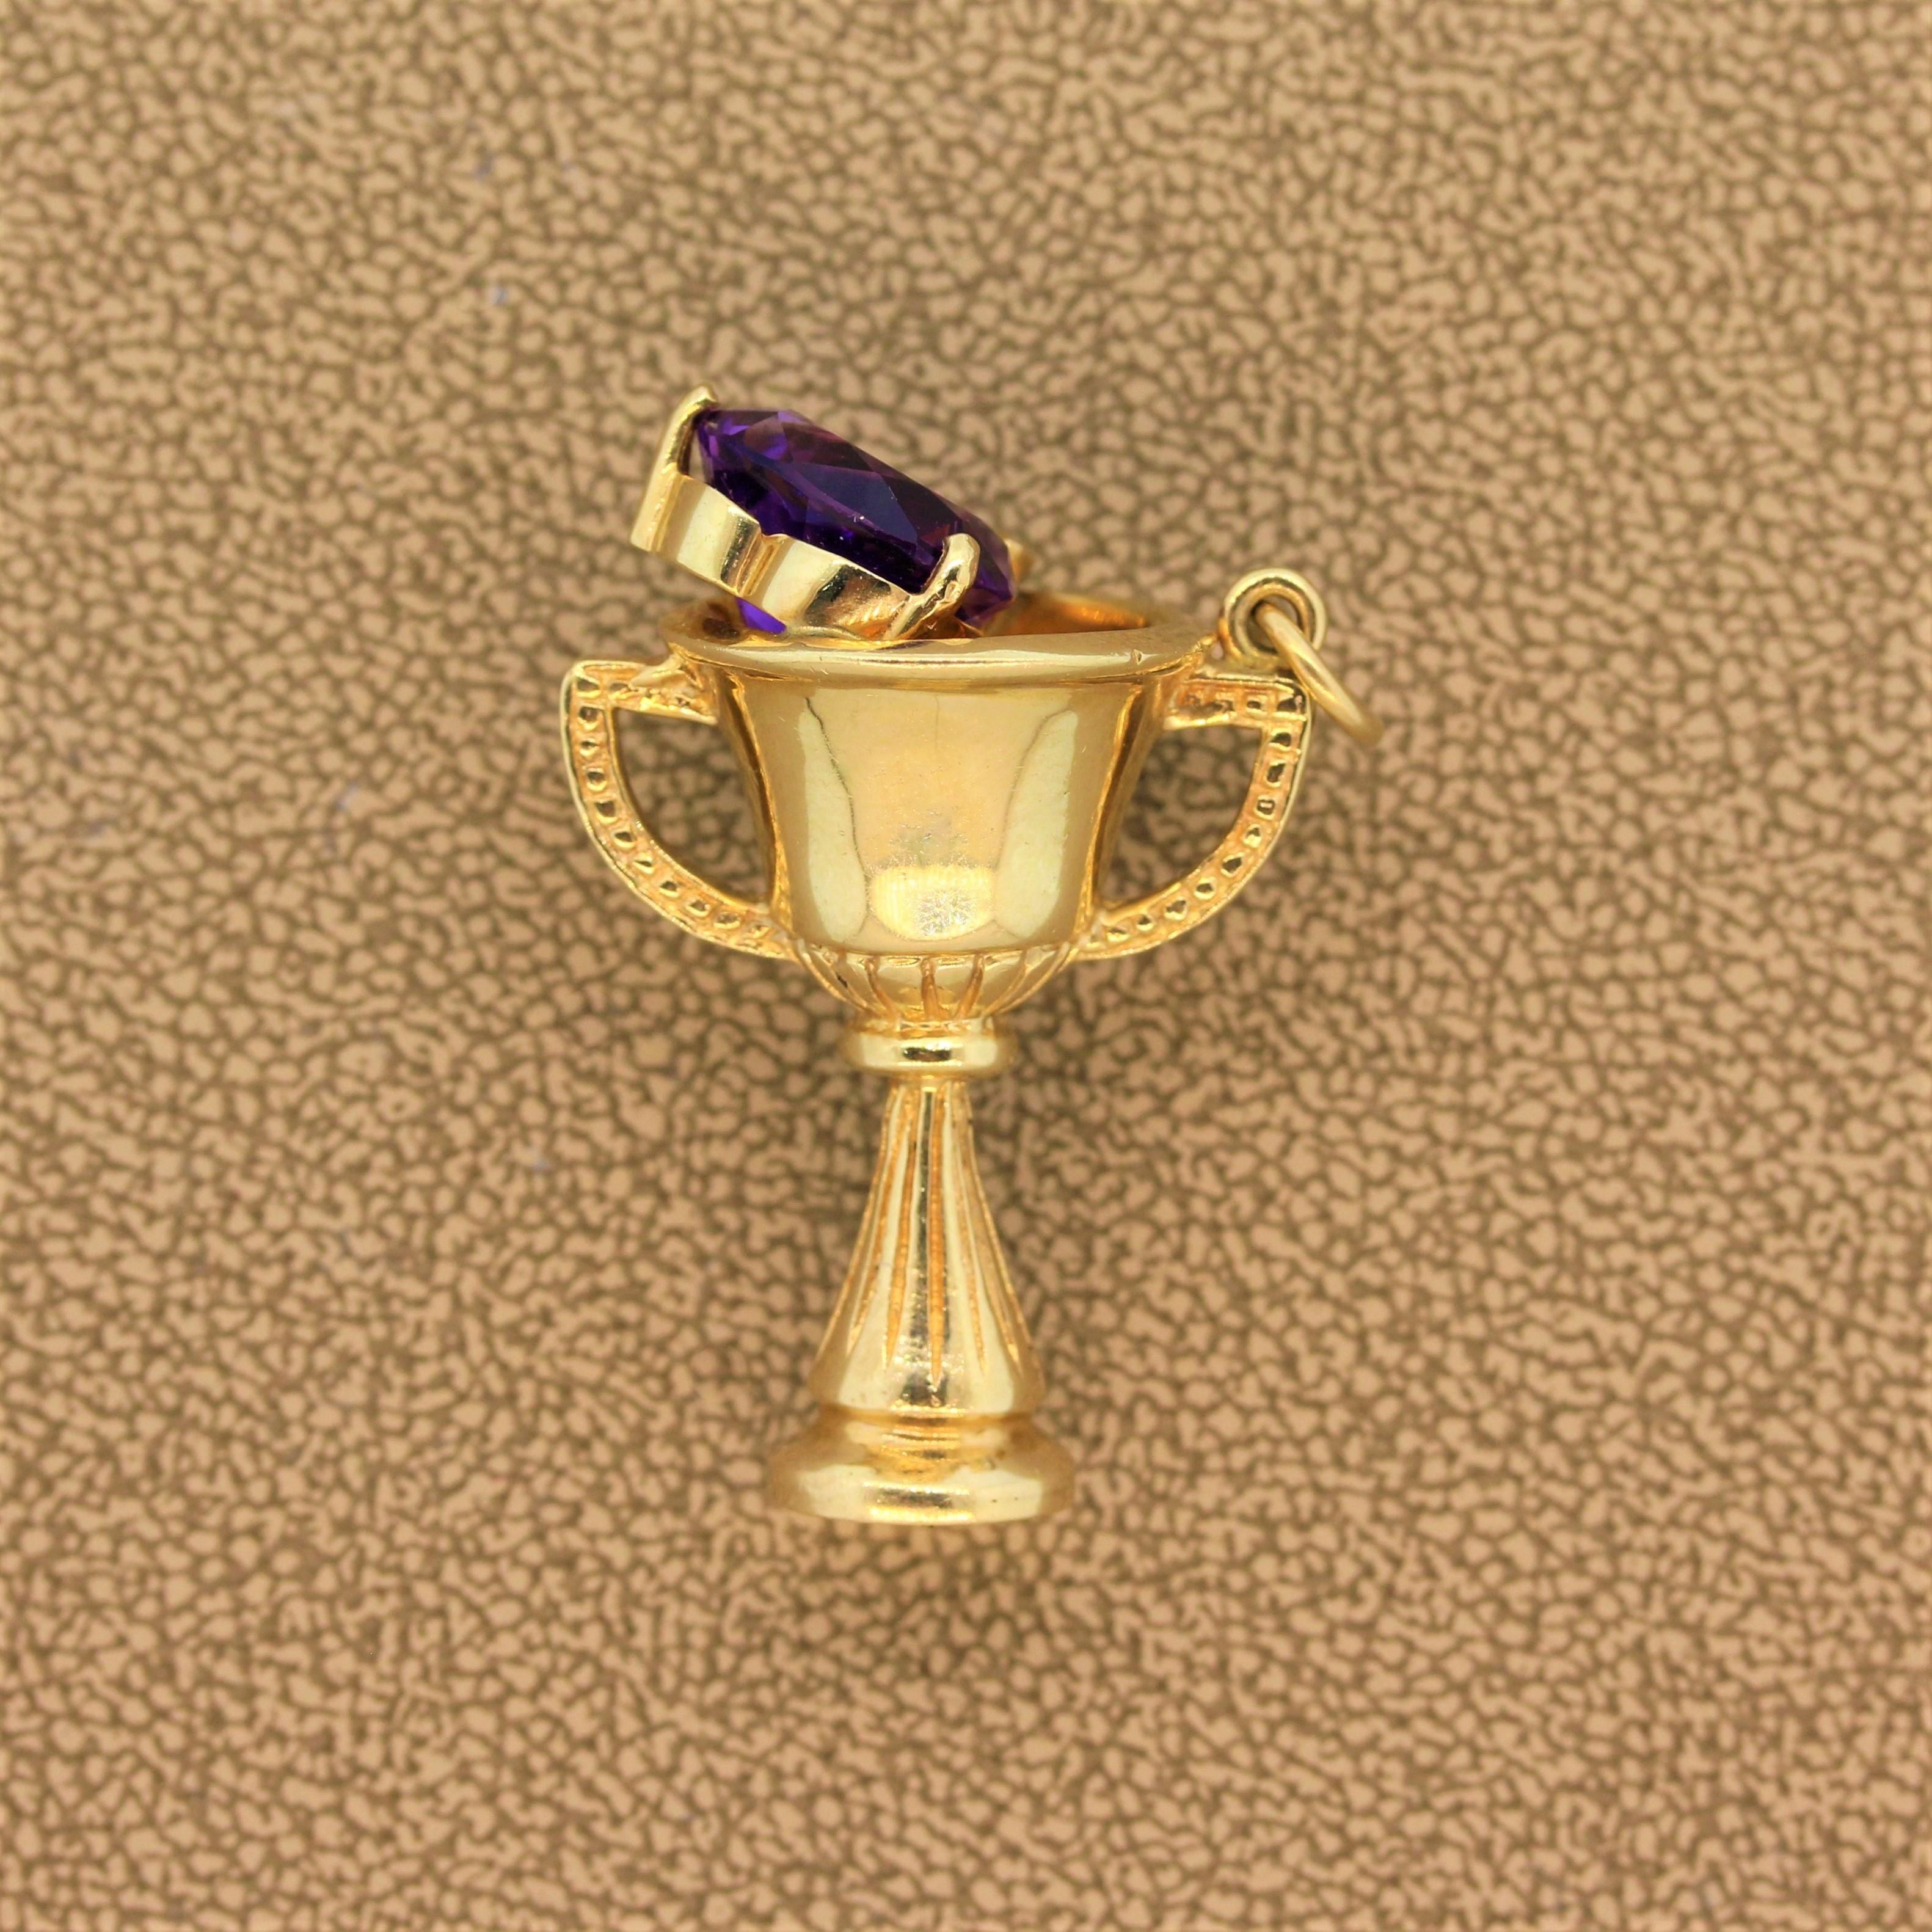 This one’s a winner! A trophy made of 14K yellow gold with a royal purple trillion cut amethyst by its edge. This champion’s pendant can just as easily be worn on a charm bracelet to suit any outfit.

Pendant Length: 1.30 inches
Pendant Width: 0.95